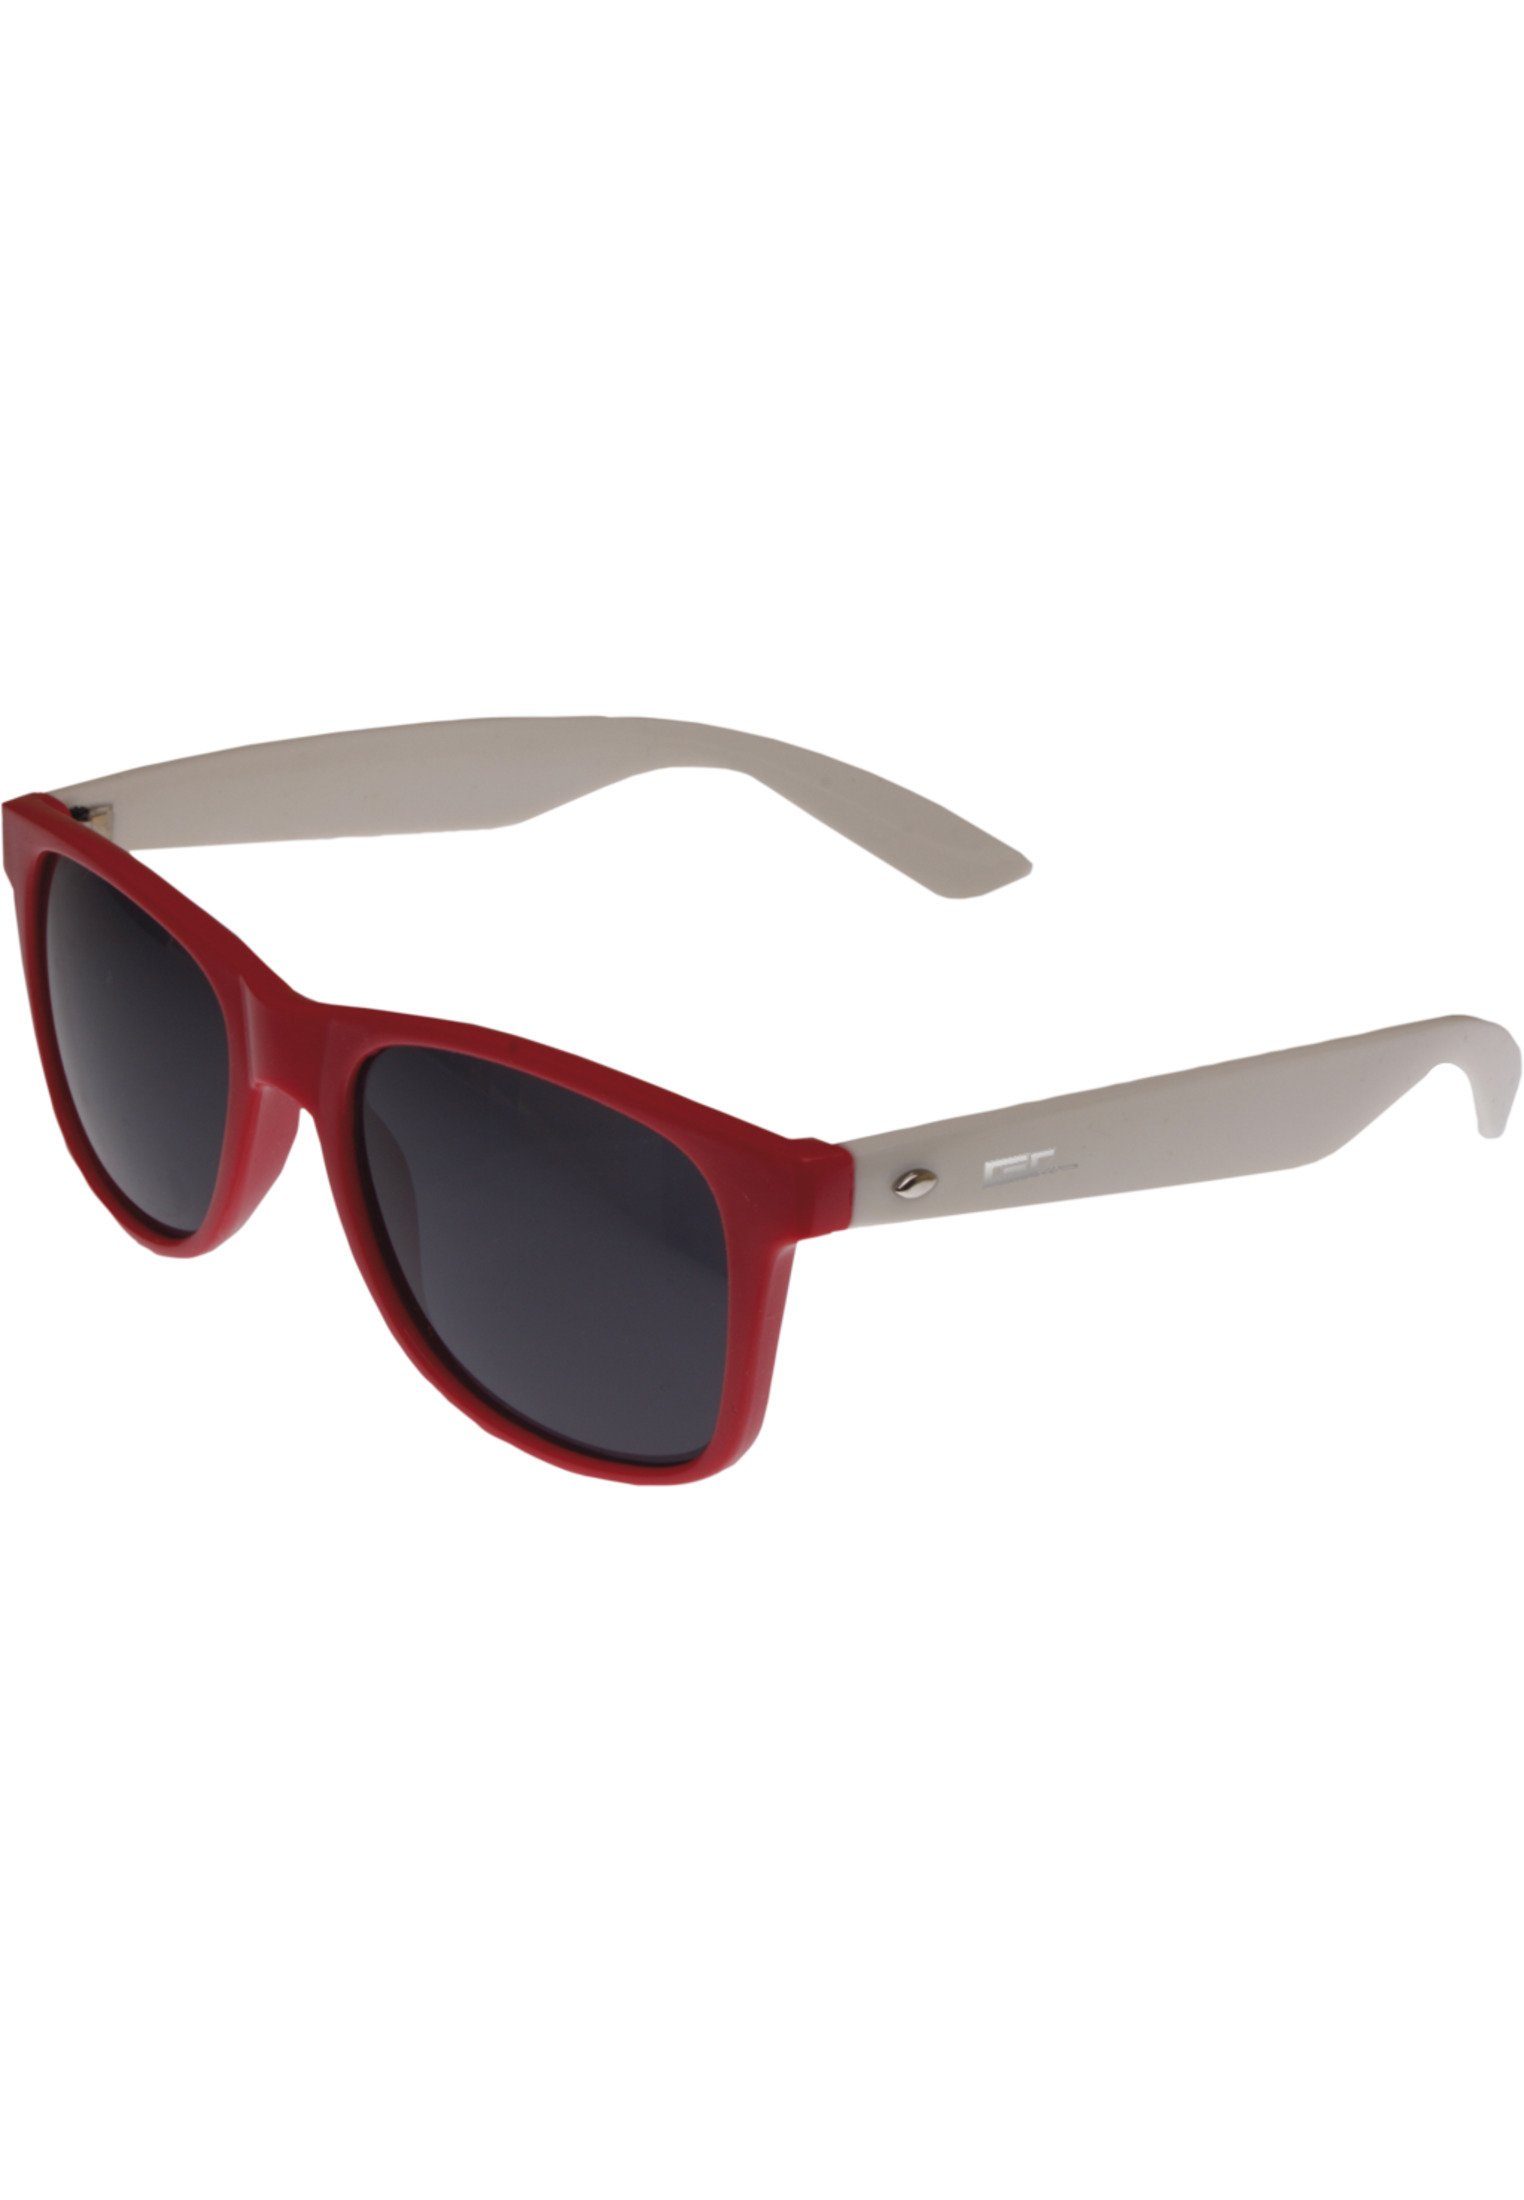 MSTRDS Sonnenbrille Accessoires Groove Shades GStwo red/white